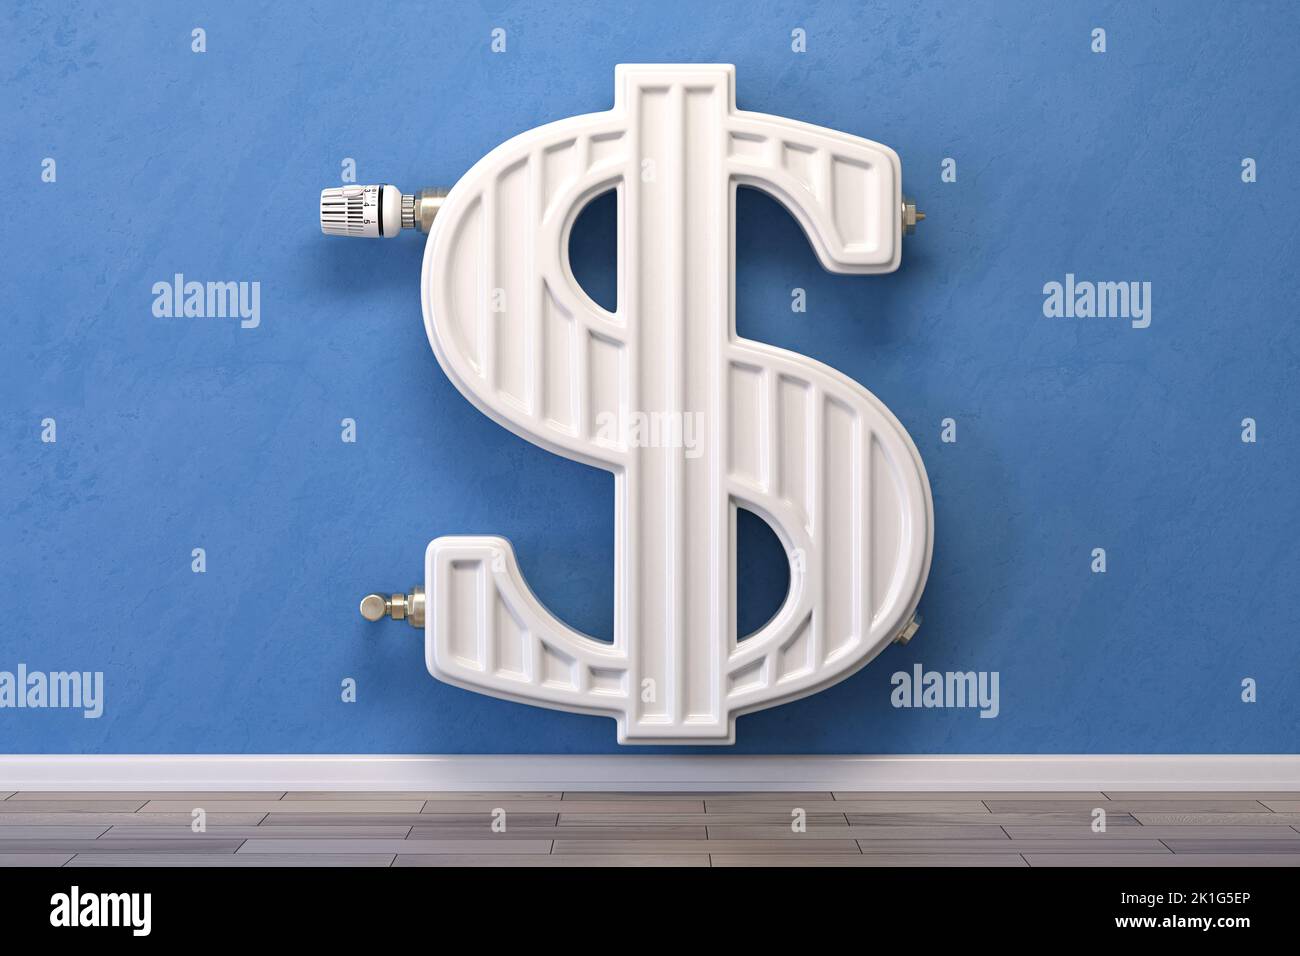 Heating radiator in form of dollar sign.  Energy crisis, energy efficiency and rising heating costs in USA concept. 3d illustration Stock Photo